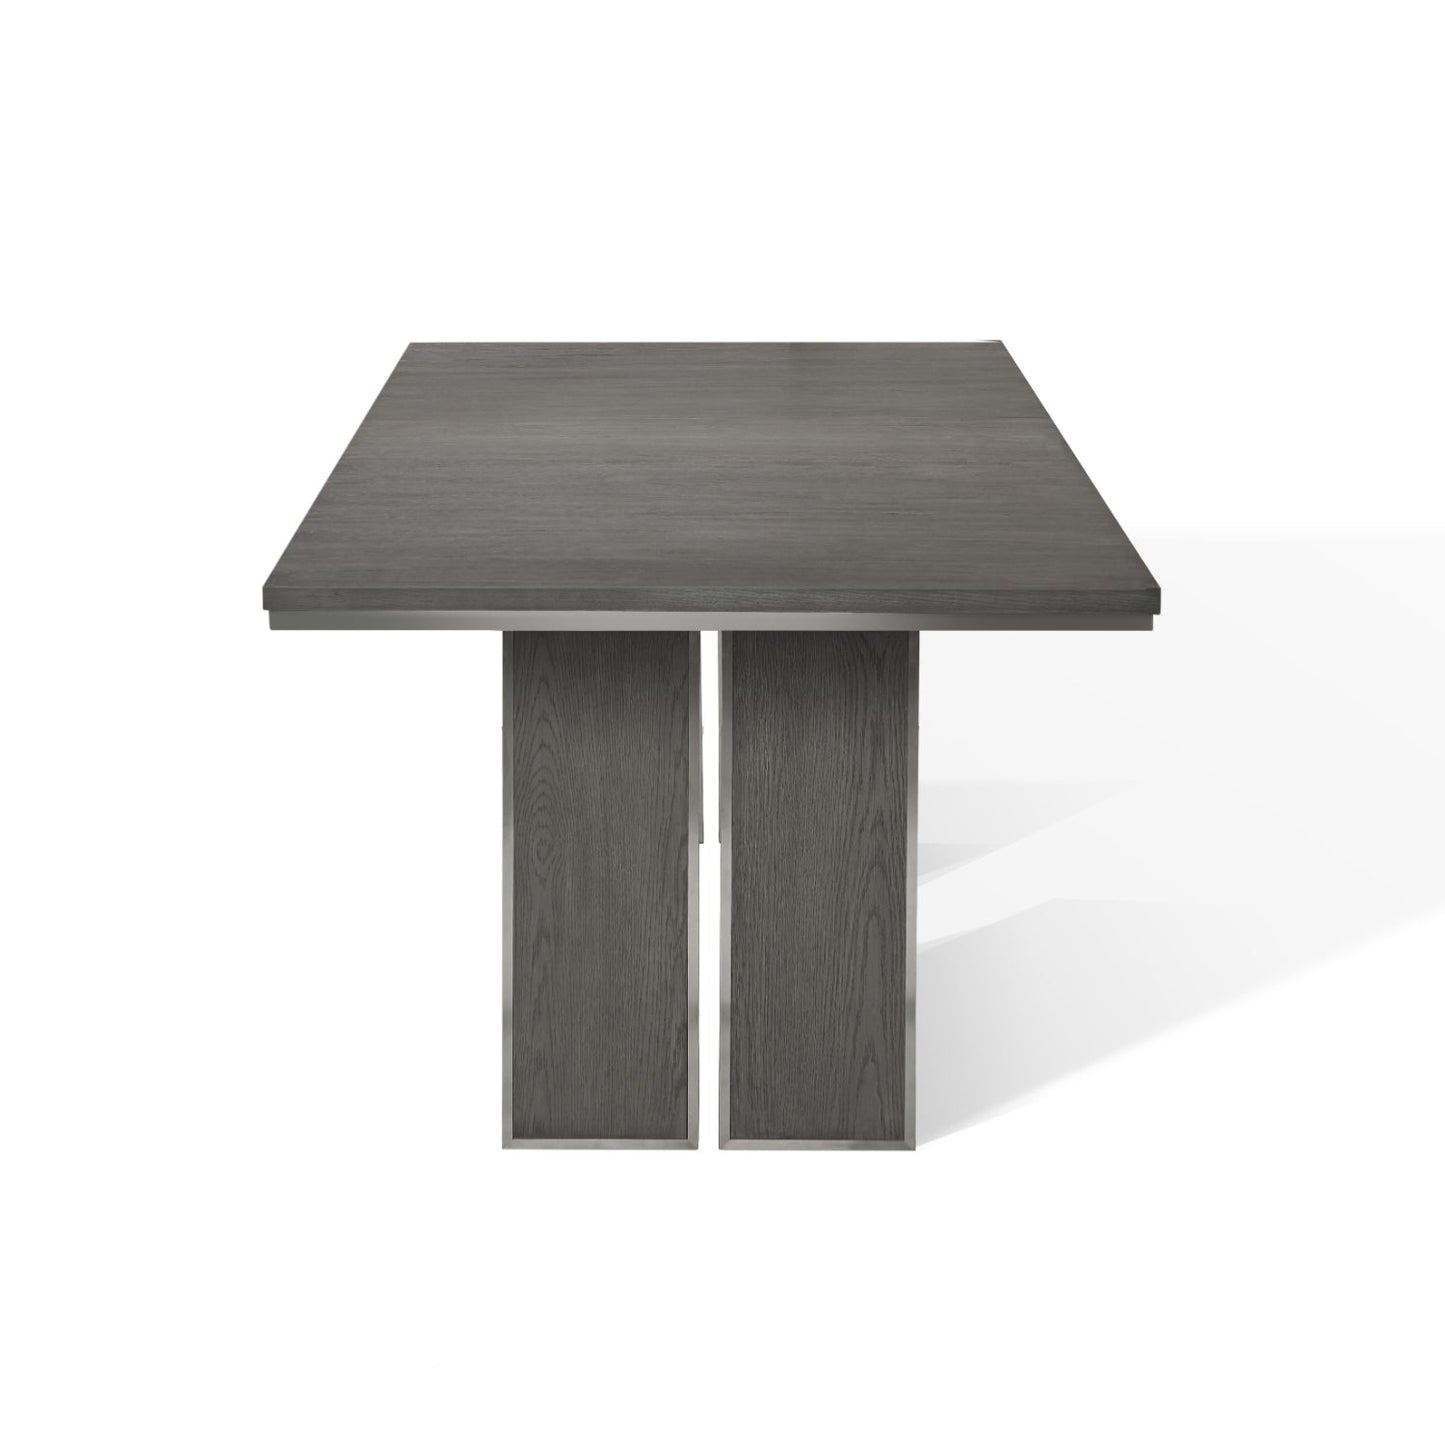 Modus Plata Extension Dining Table in Thunder Grey